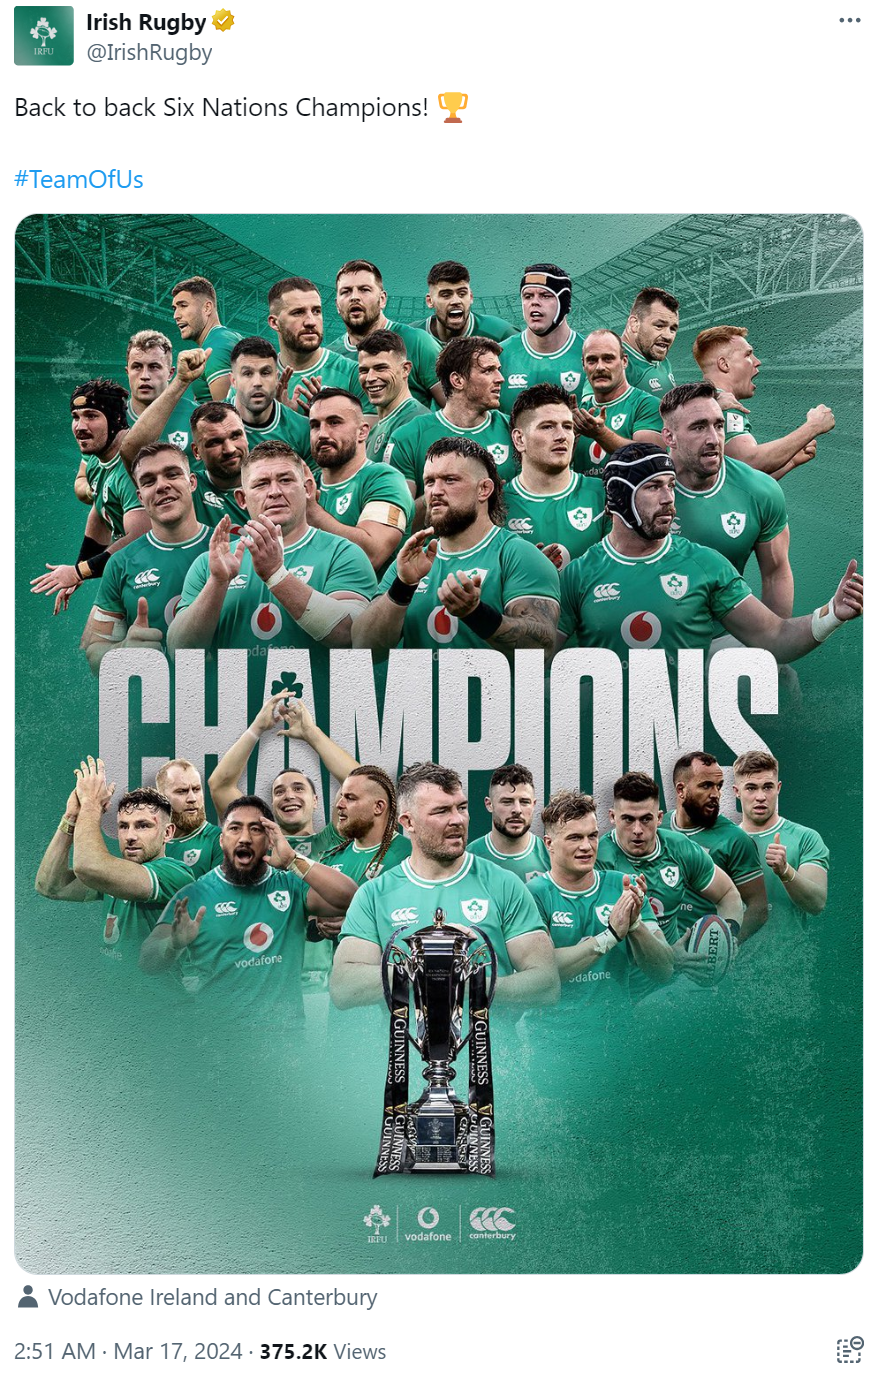 Irish Rugby's tweet on March 17 about Ireland's sixth championship in the Six Nations. /@IrishRugby